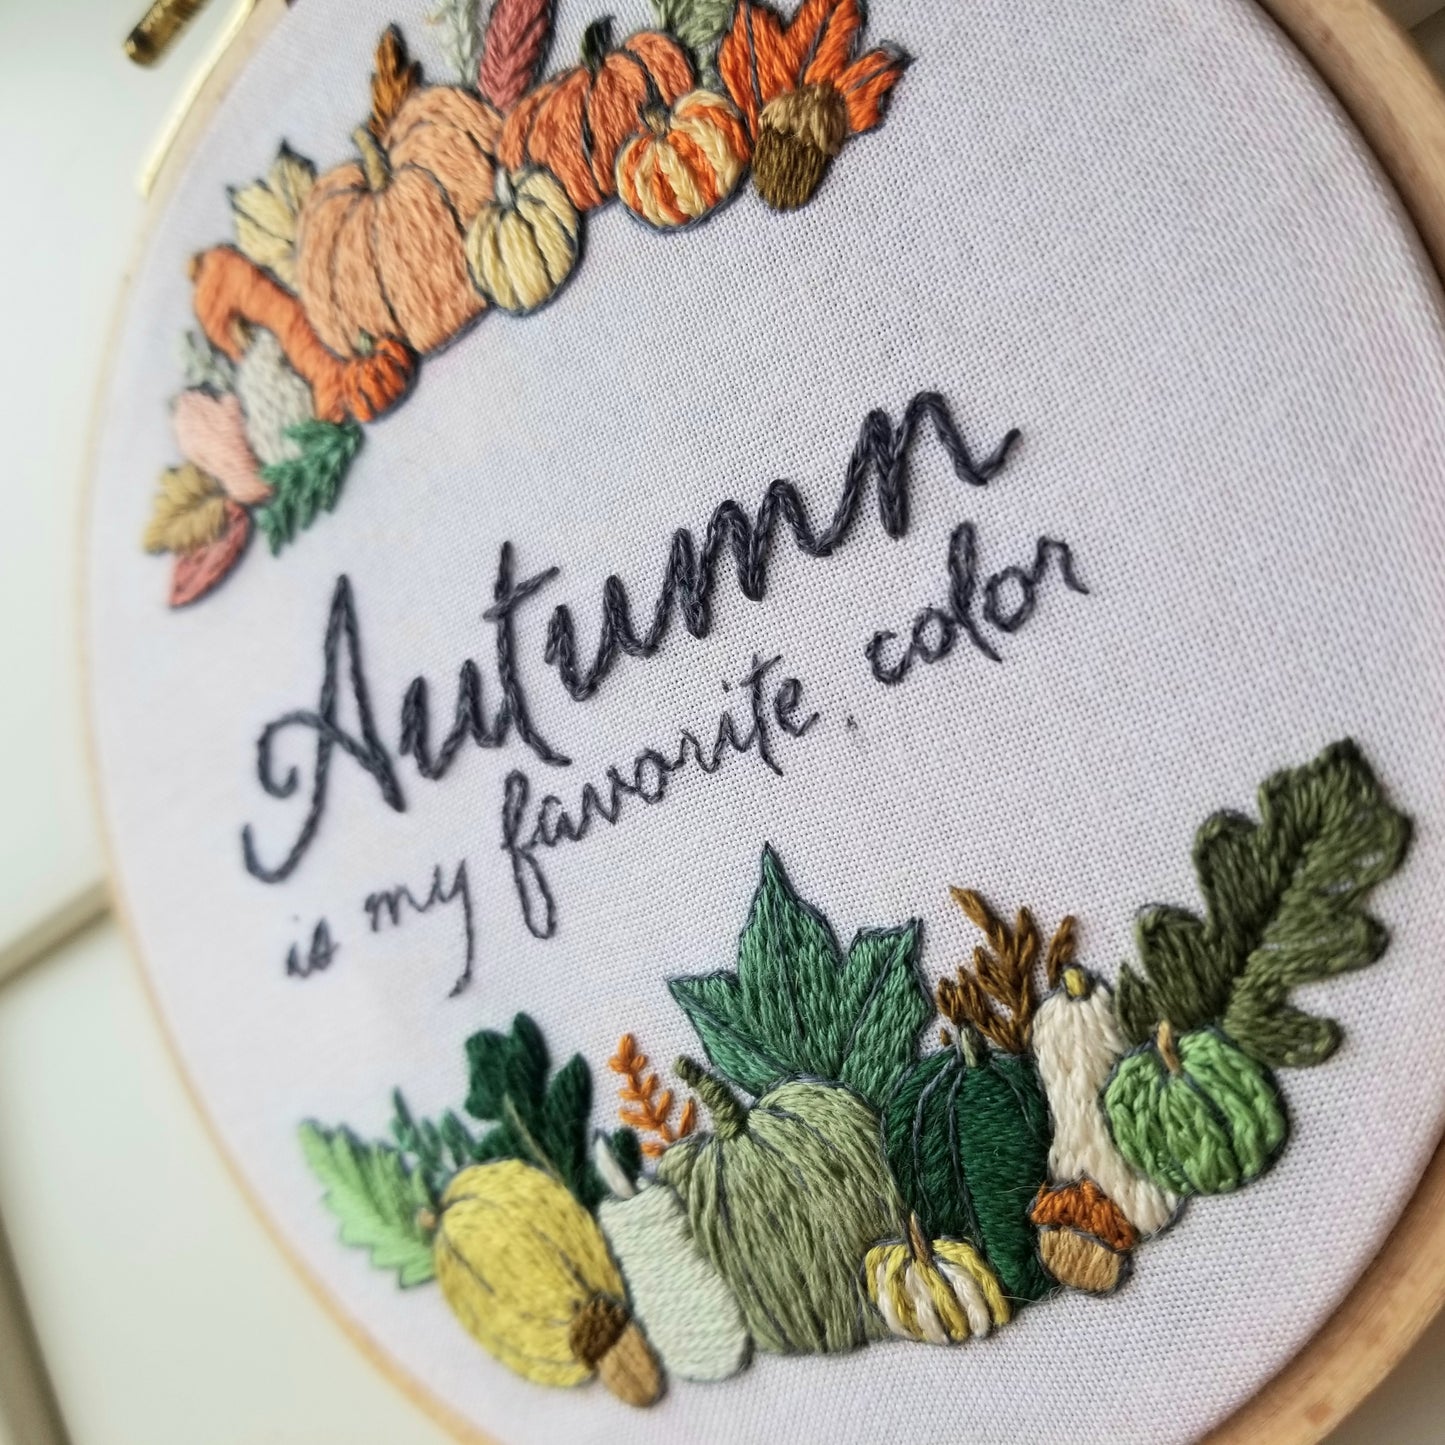 Autumn Colors Embroidery Pattern (PDF)